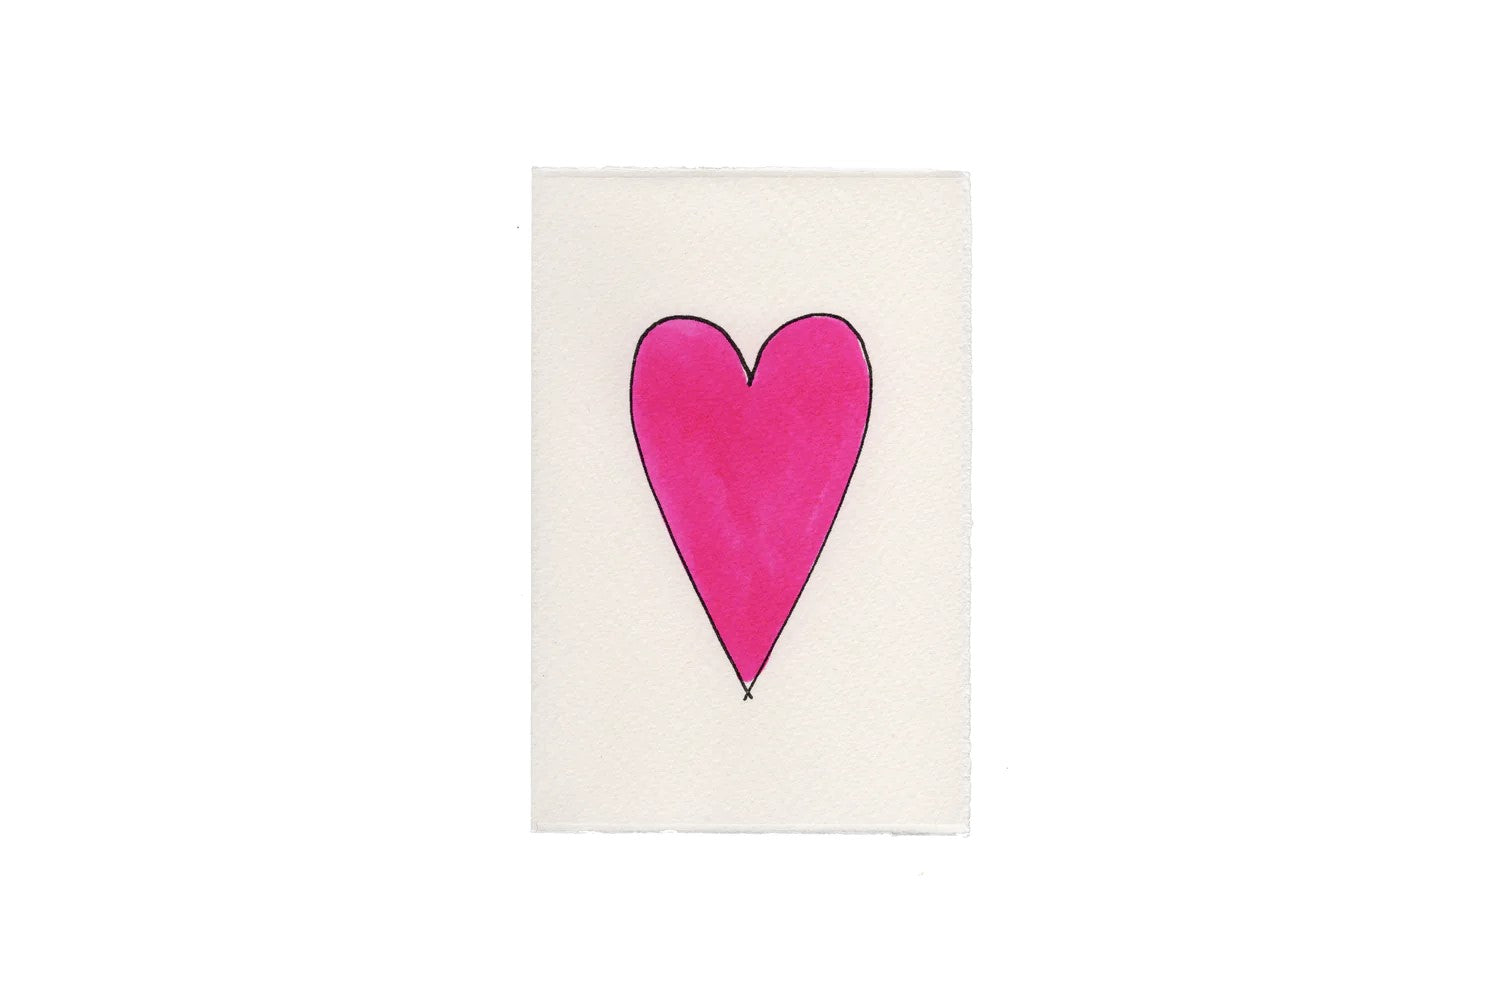 Heart Card in Bright Pink